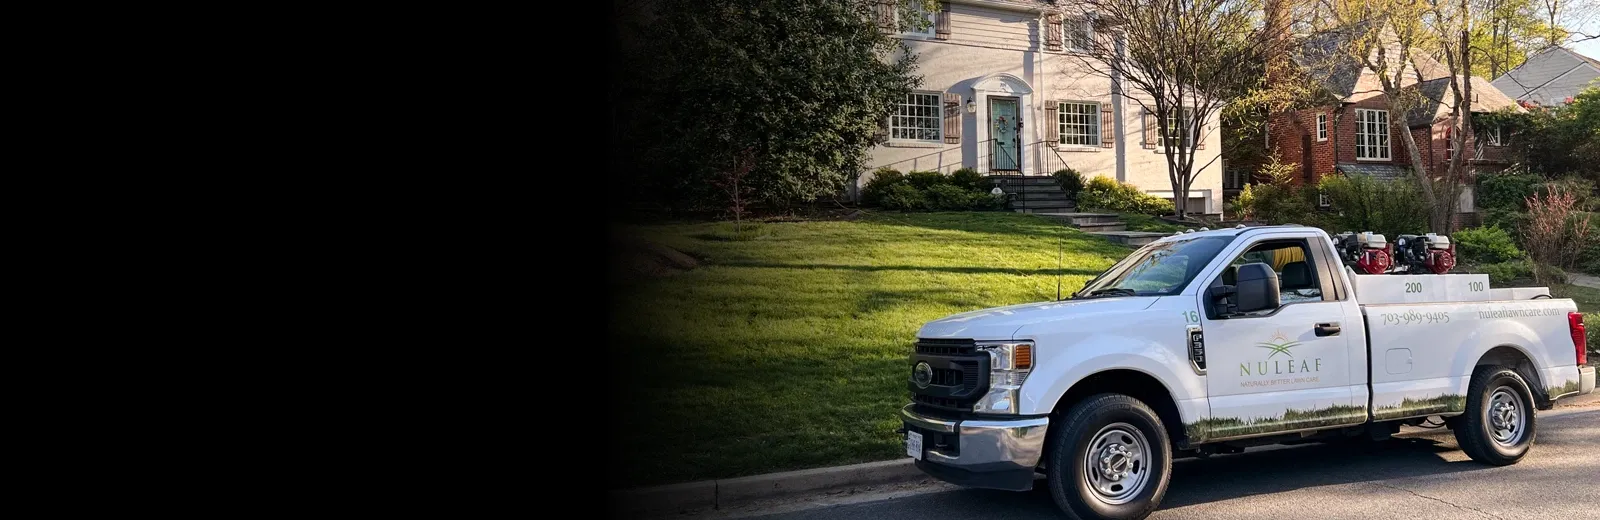 NuLeaf Lawn Care truck in front of house